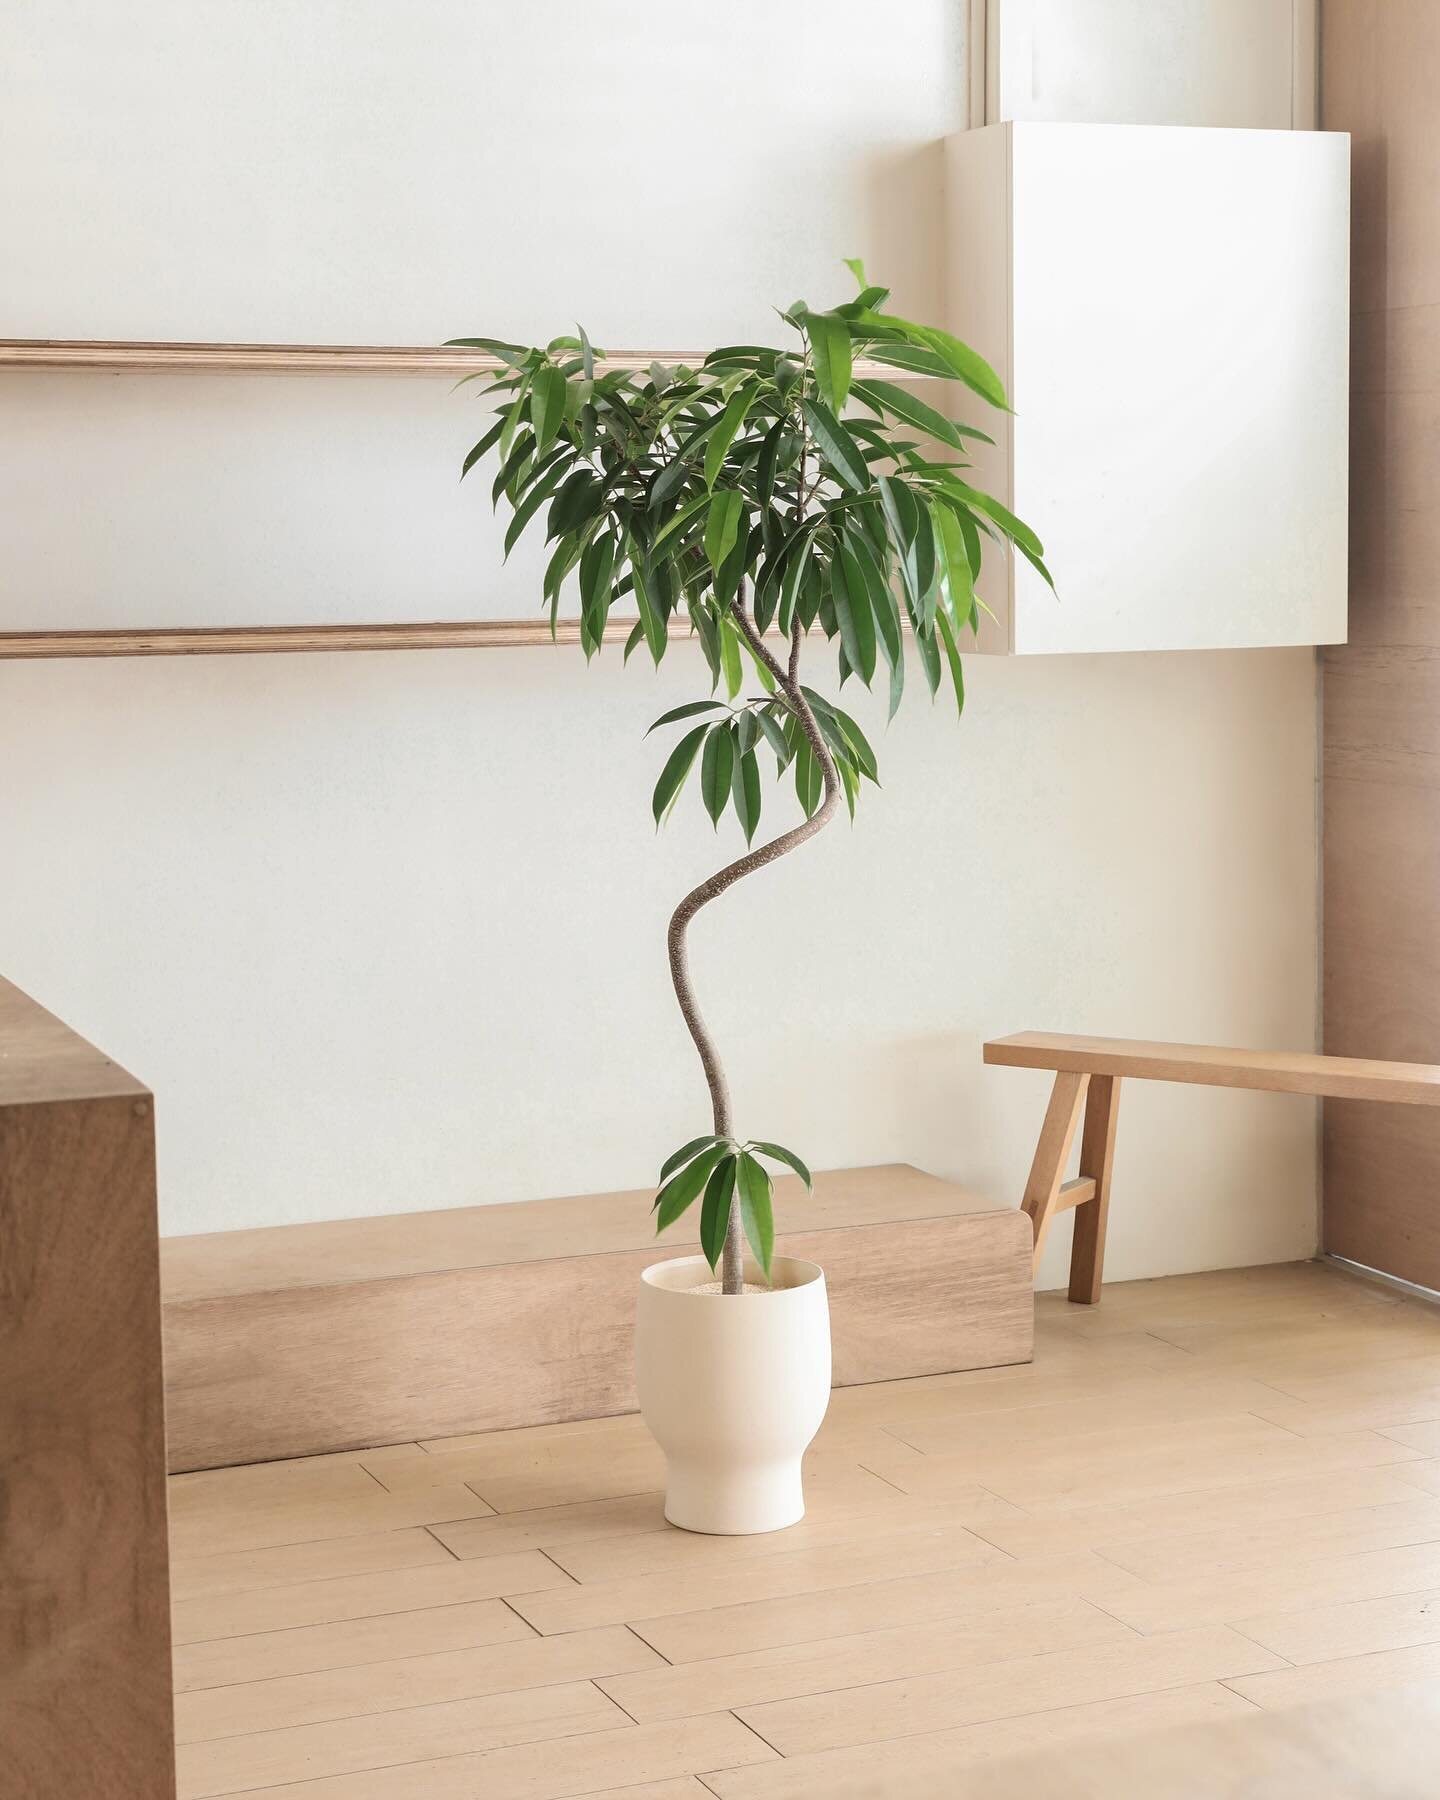 🌿✨ They&rsquo;re back! Our amazing floor-sized plants from Japan are in stock again, ranging from 1.2m to 2m tall. 👉🏻 Swipe to see these elegant centerpieces paired with @sprout______ handmade planters to elevate your living spaces.

They are excl